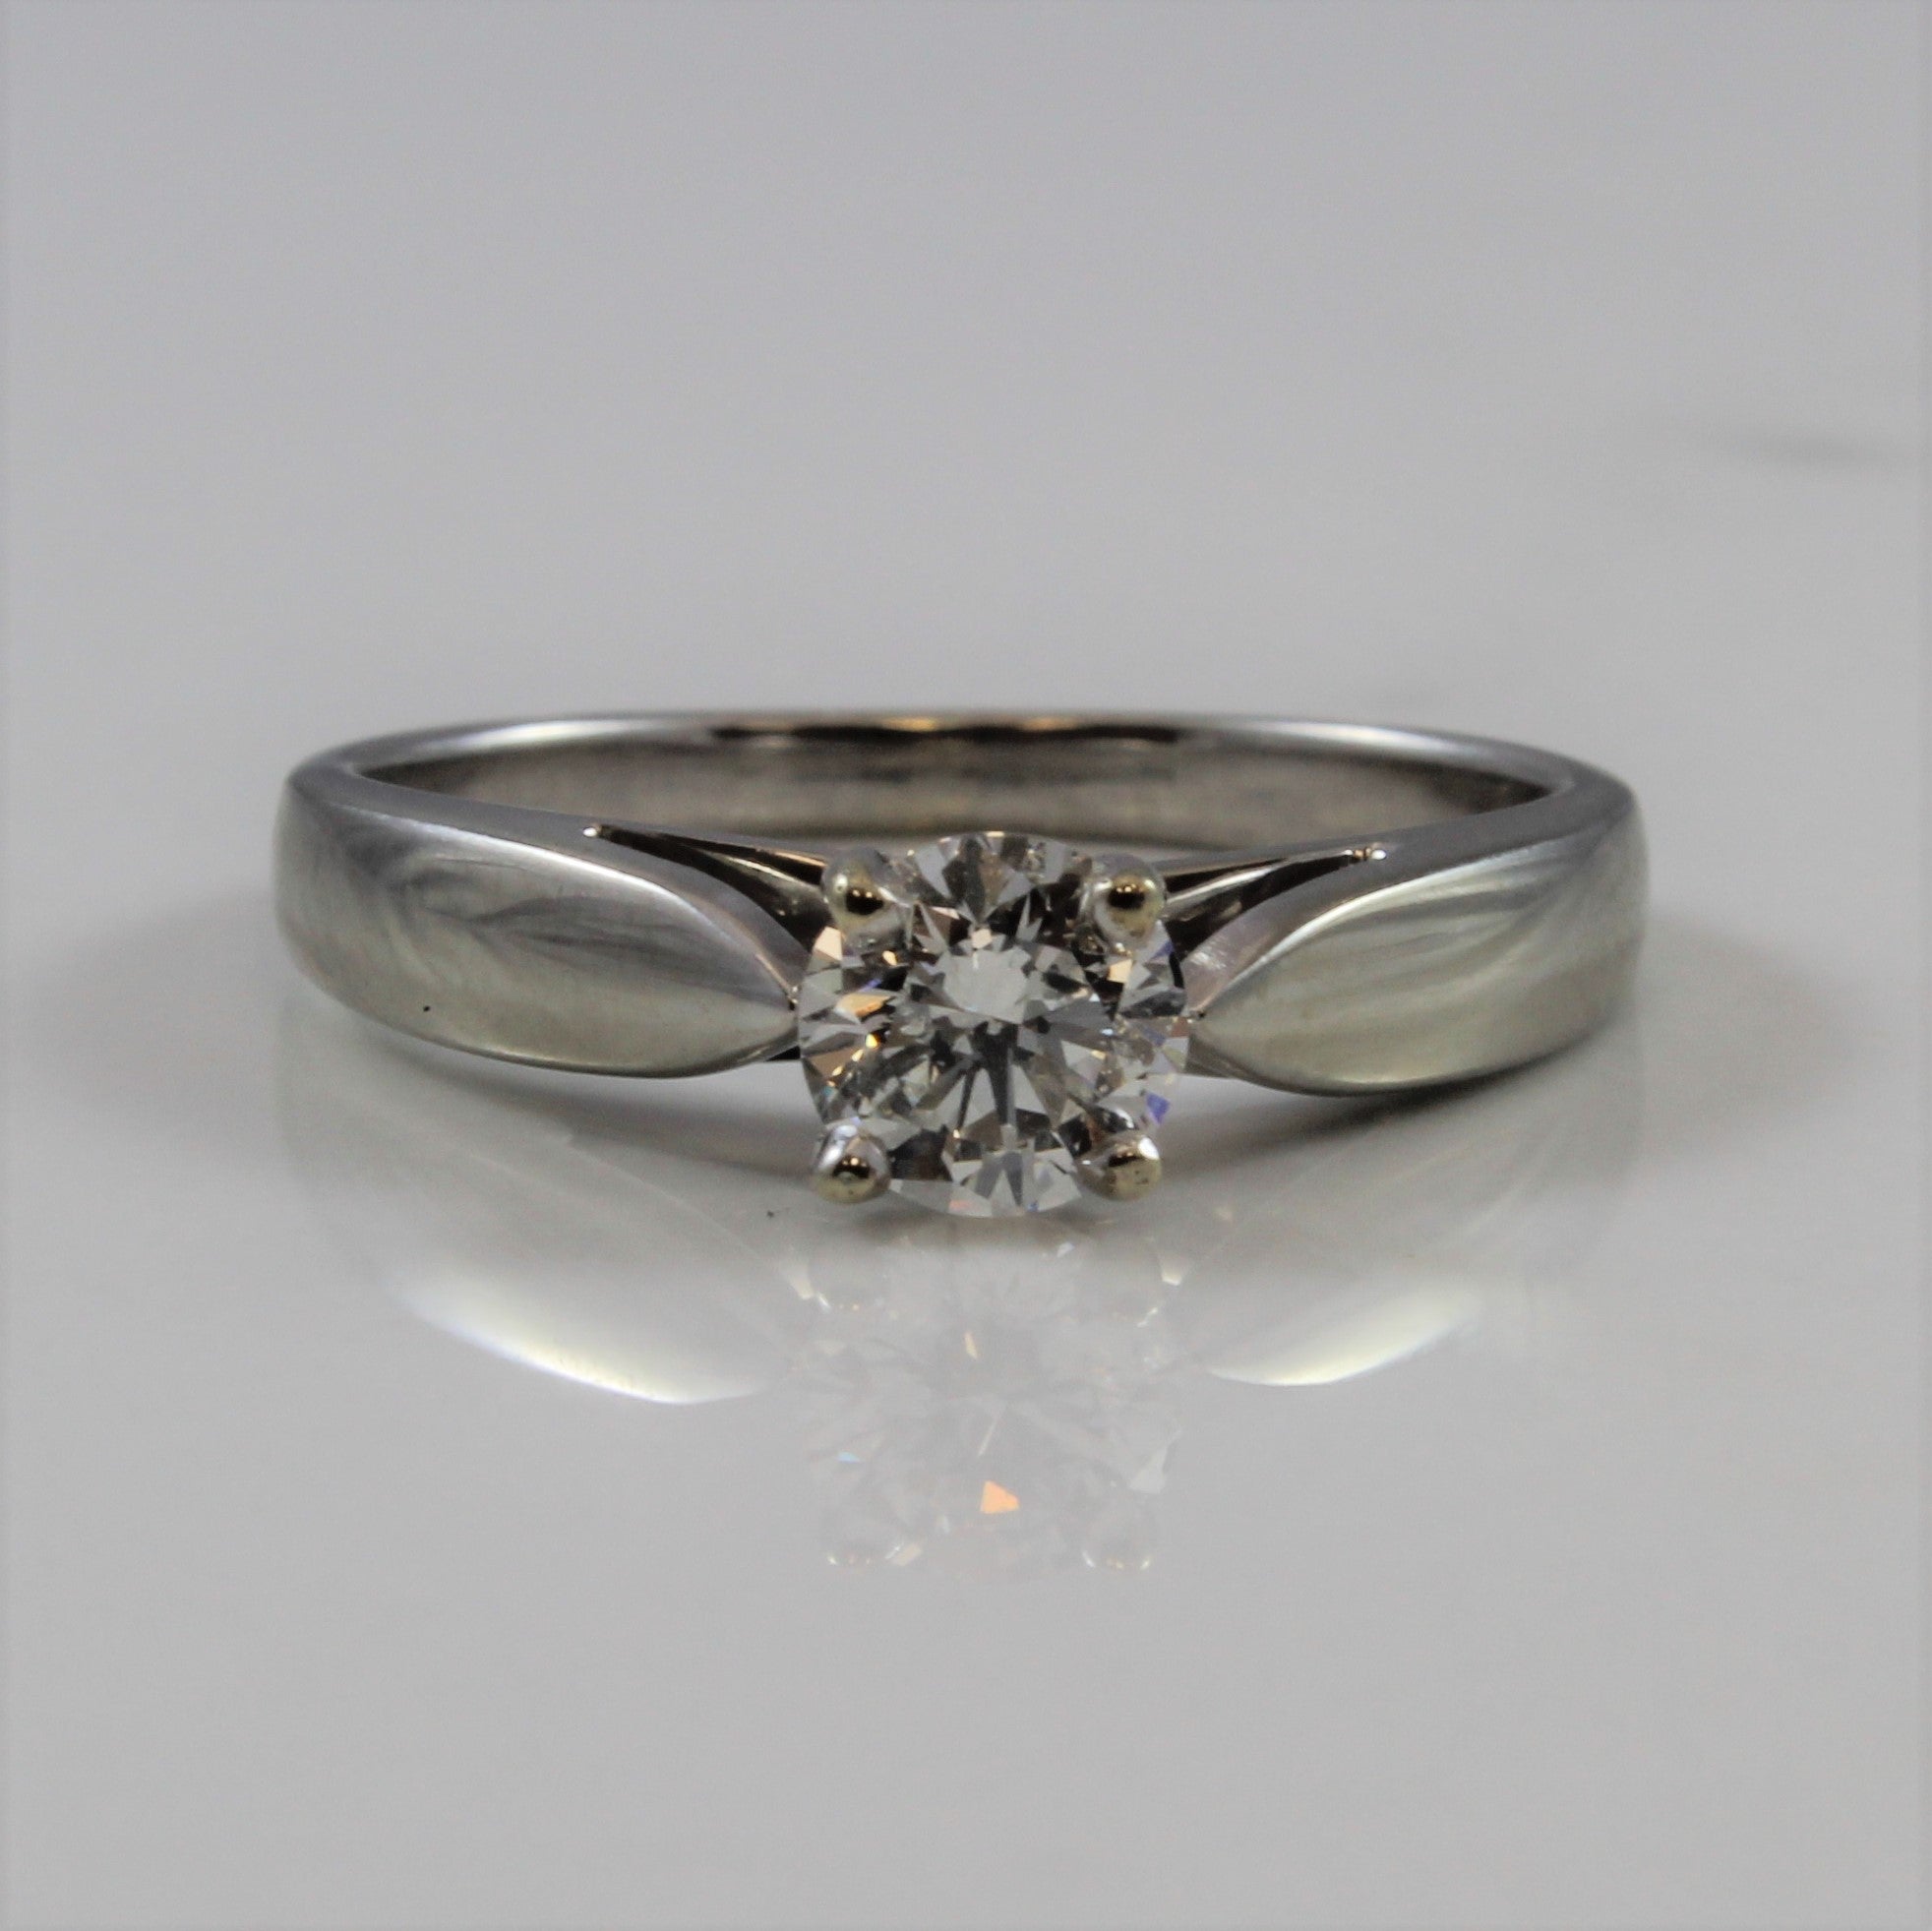 Tapered Solitaire Diamond Engagement Ring | 0.50 ct | SZ 6.25 |